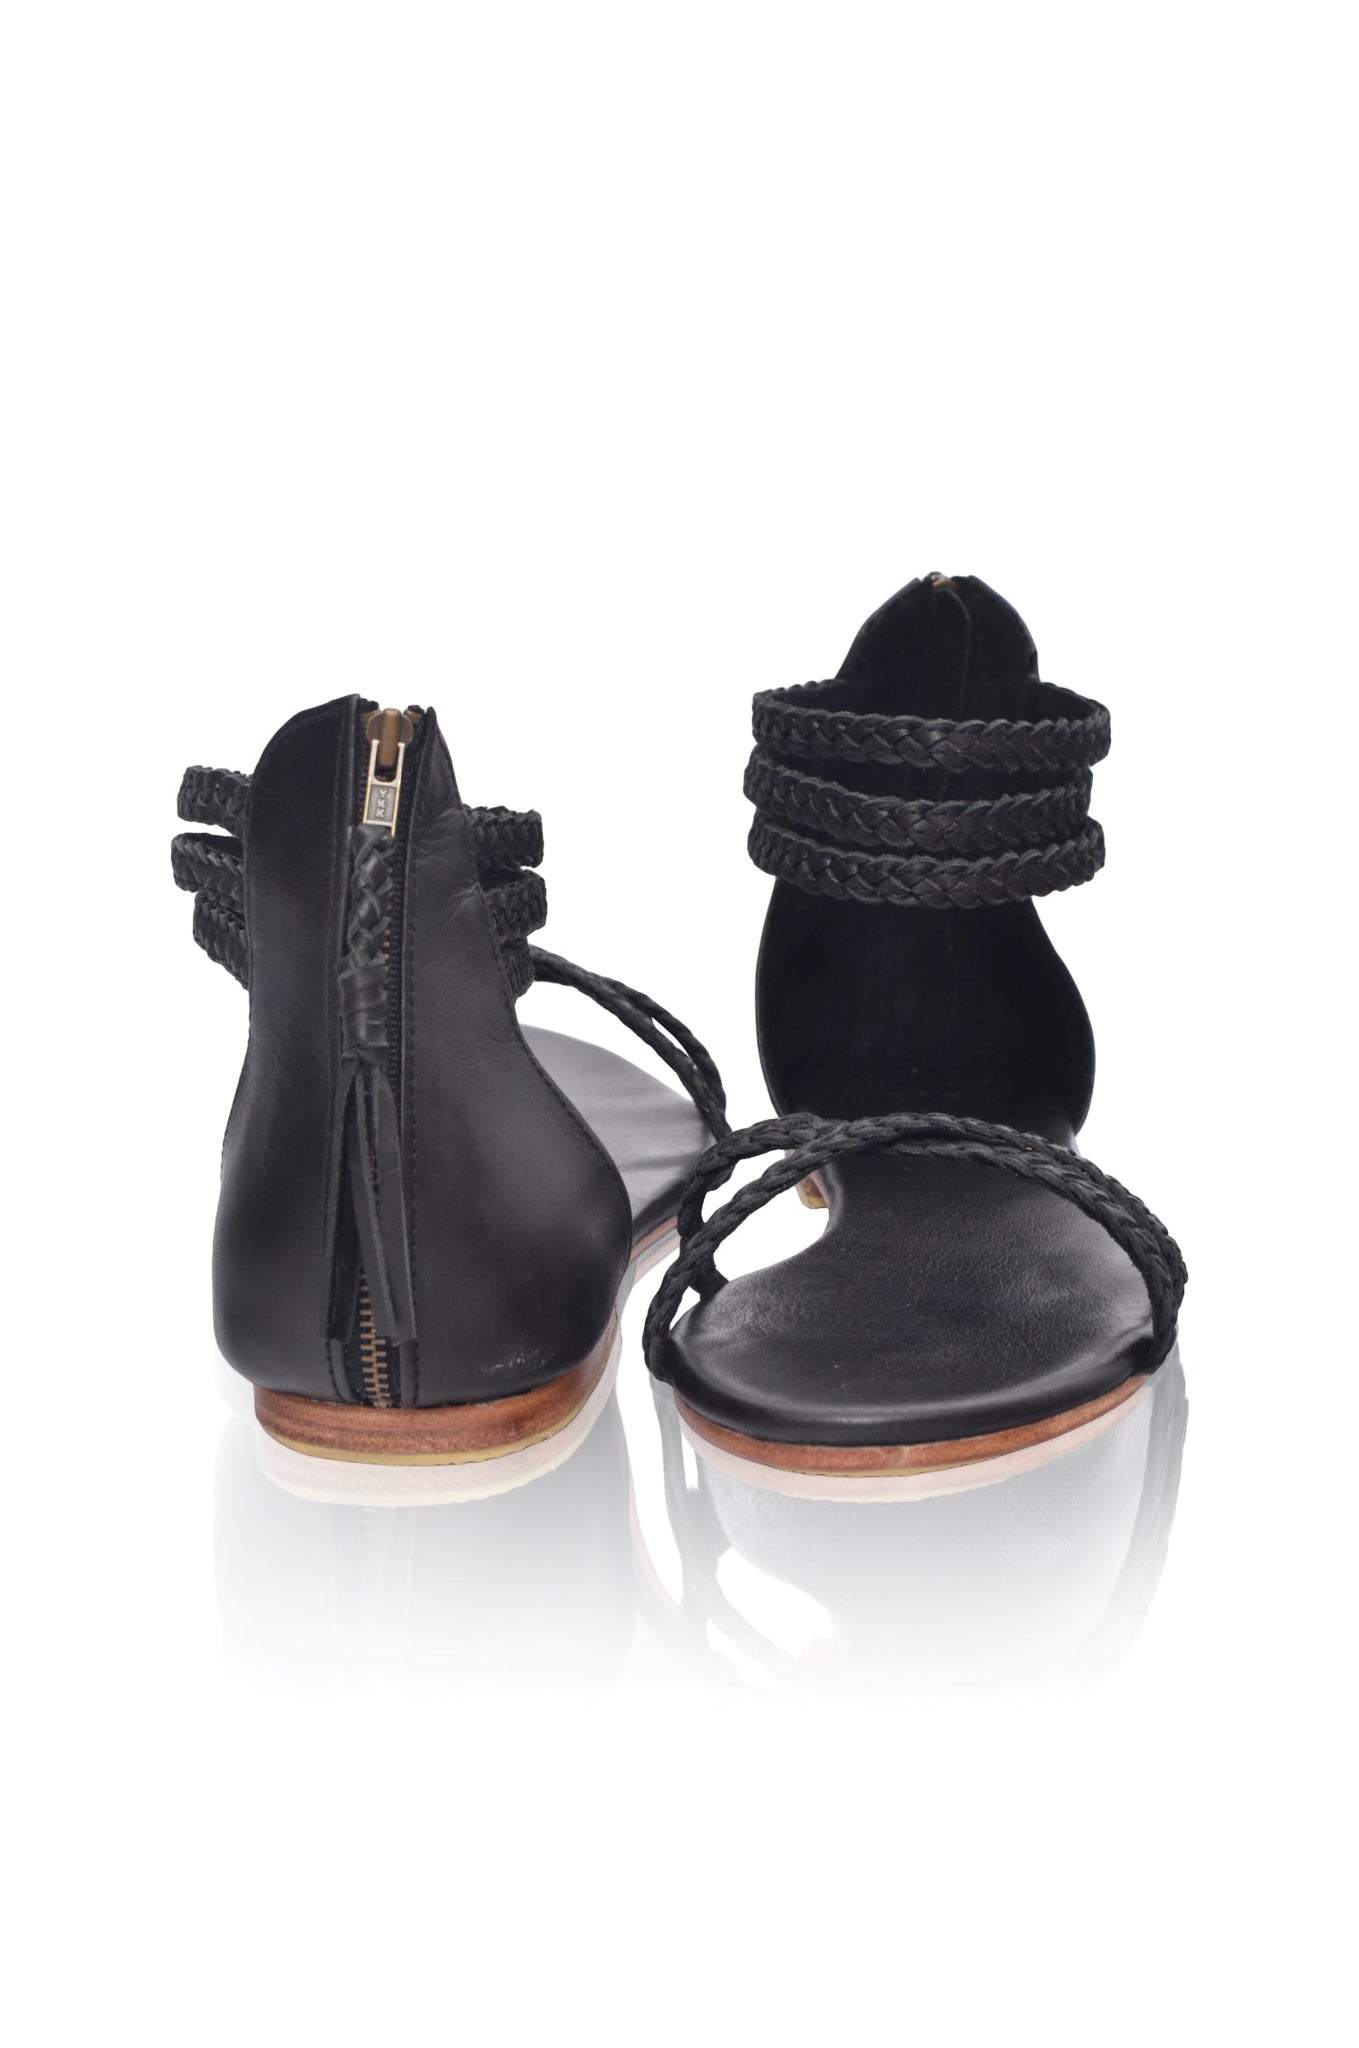 Calypso Thong Leather Sandals by ELF